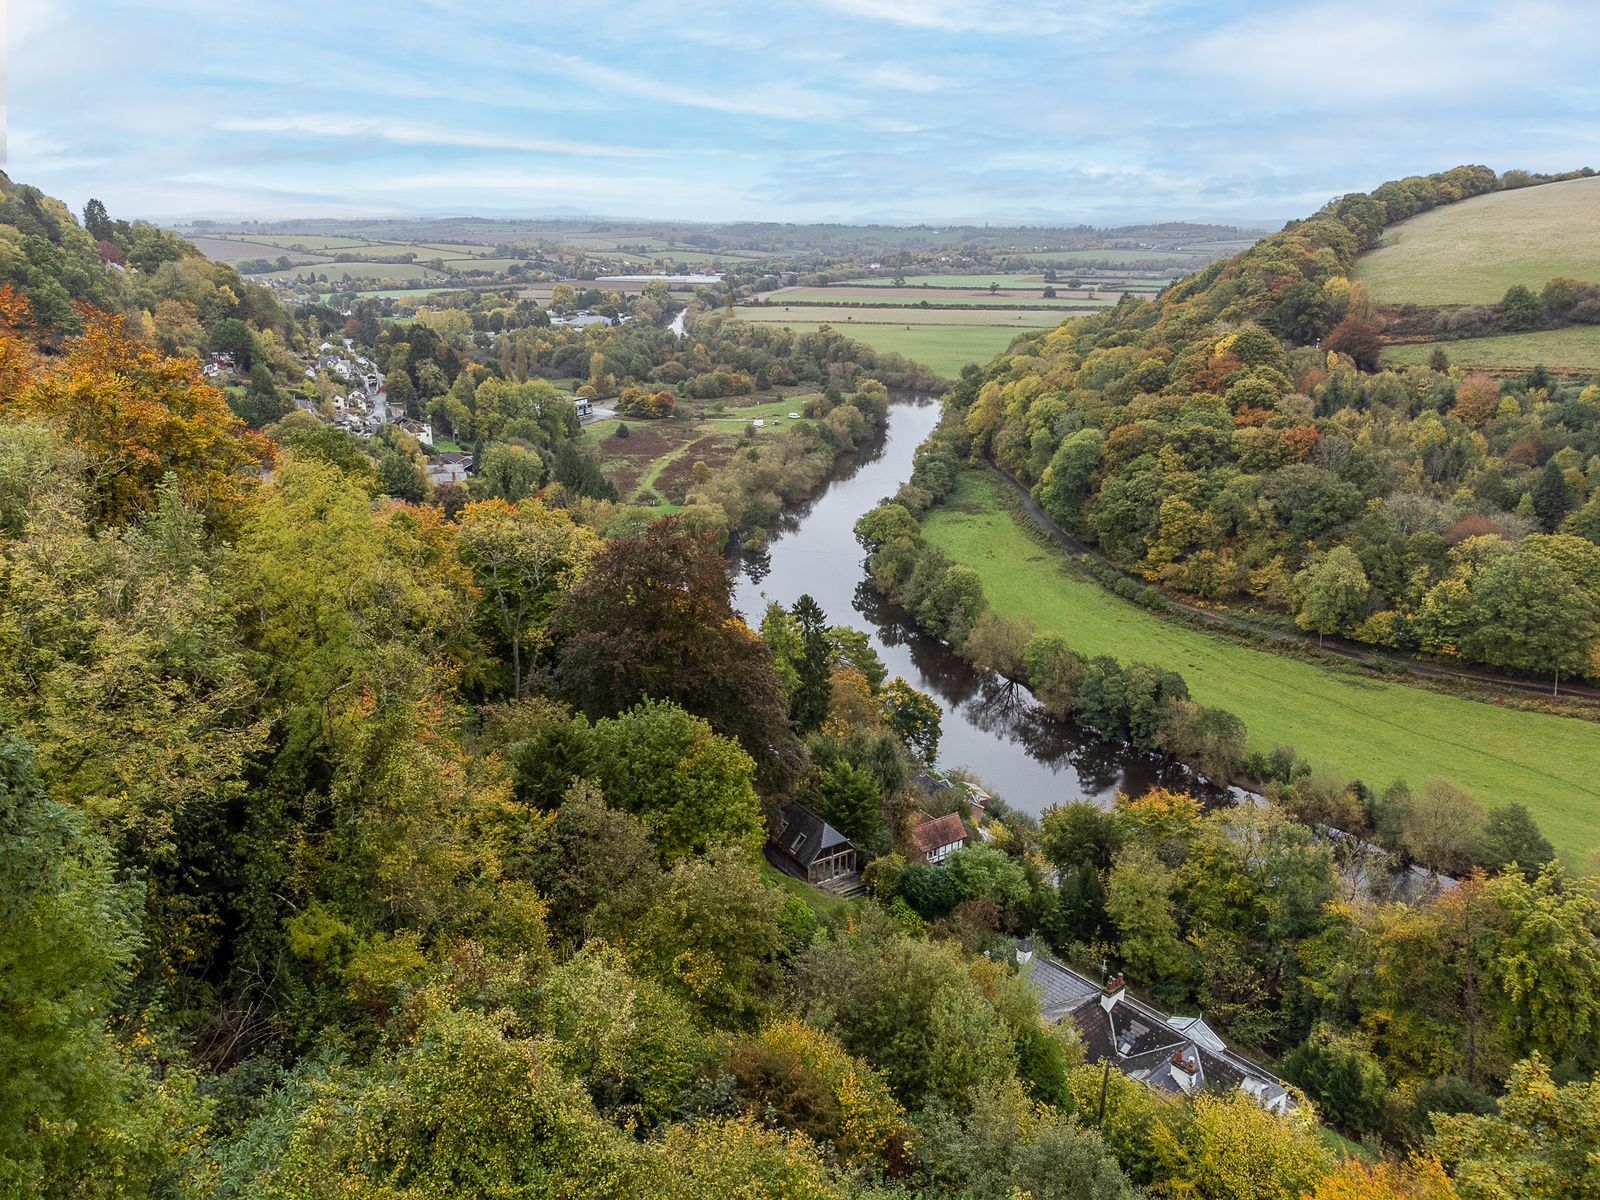 The four-bed Rose Bank has views over Symonds Yat and the river Wye. Picture: Hamilton Stiller Estate Agents/Zoopla